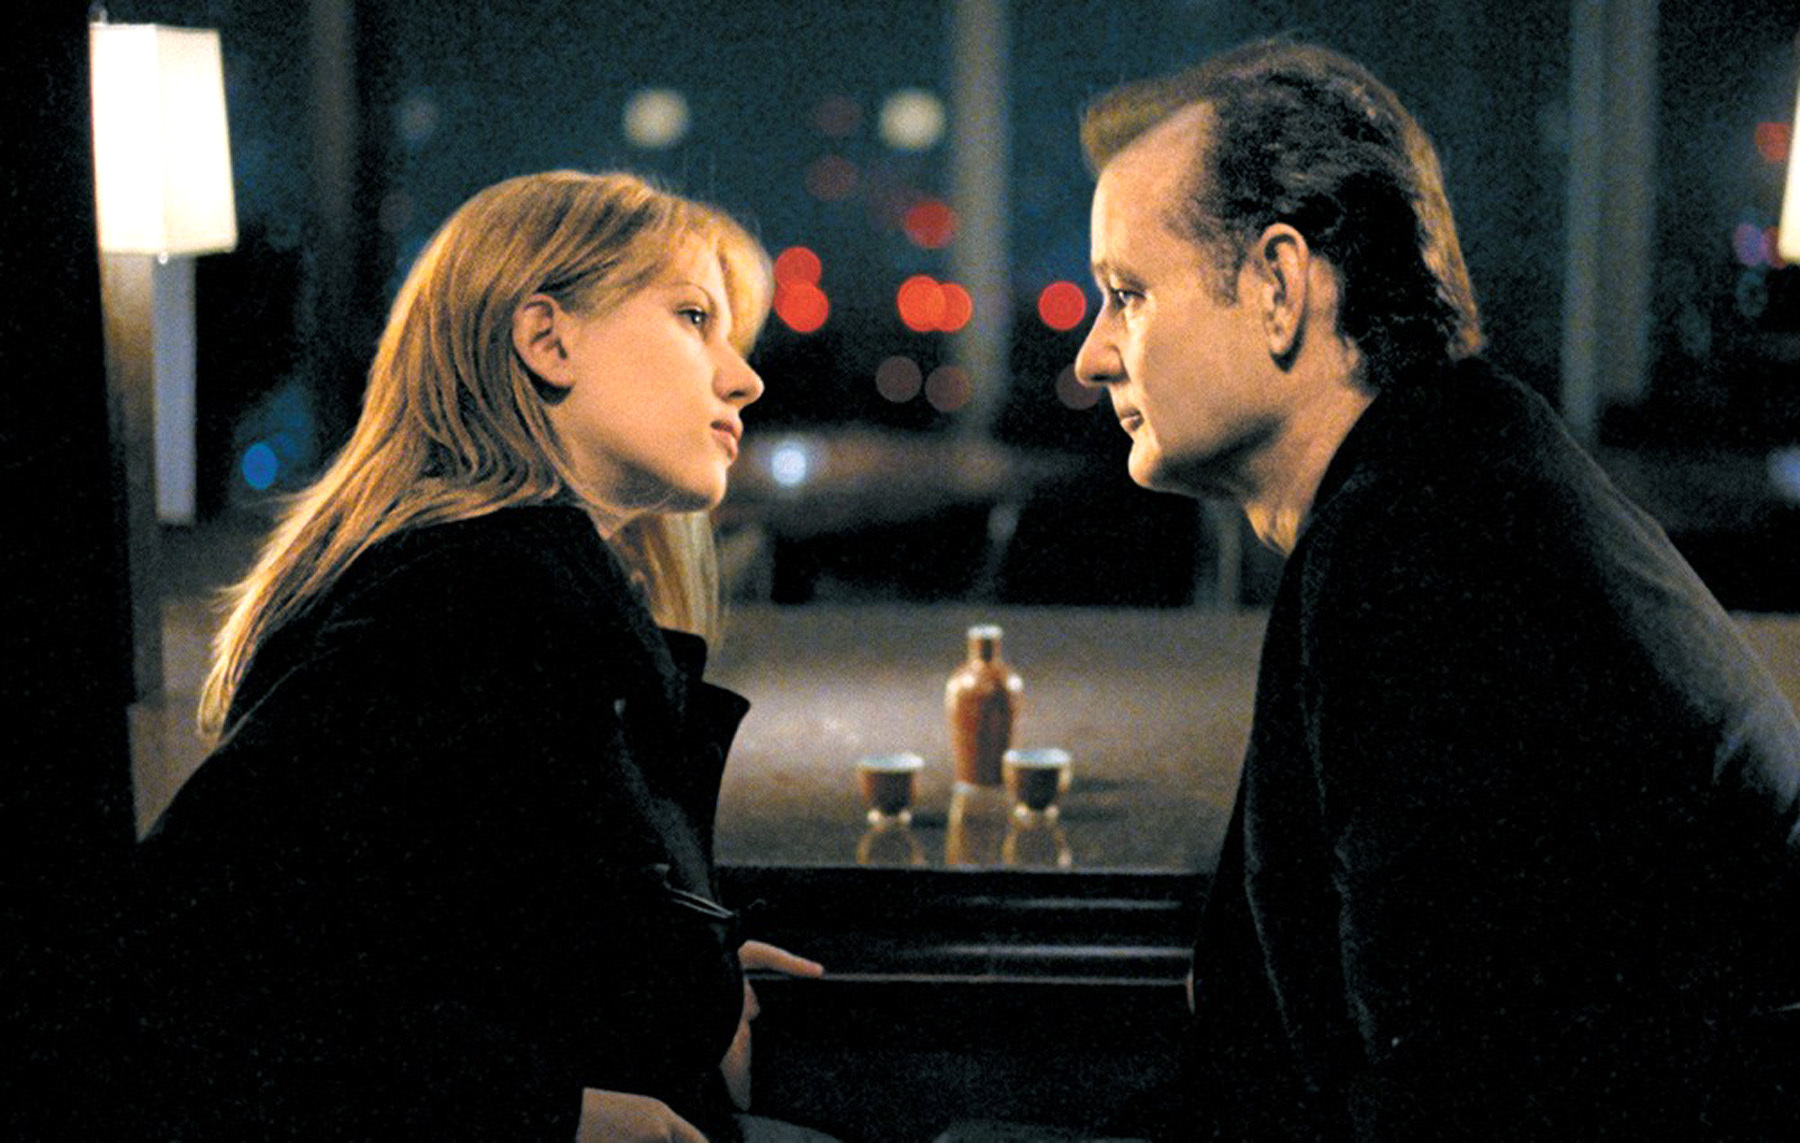 The Modern Melancholy of "Lost in Translation"